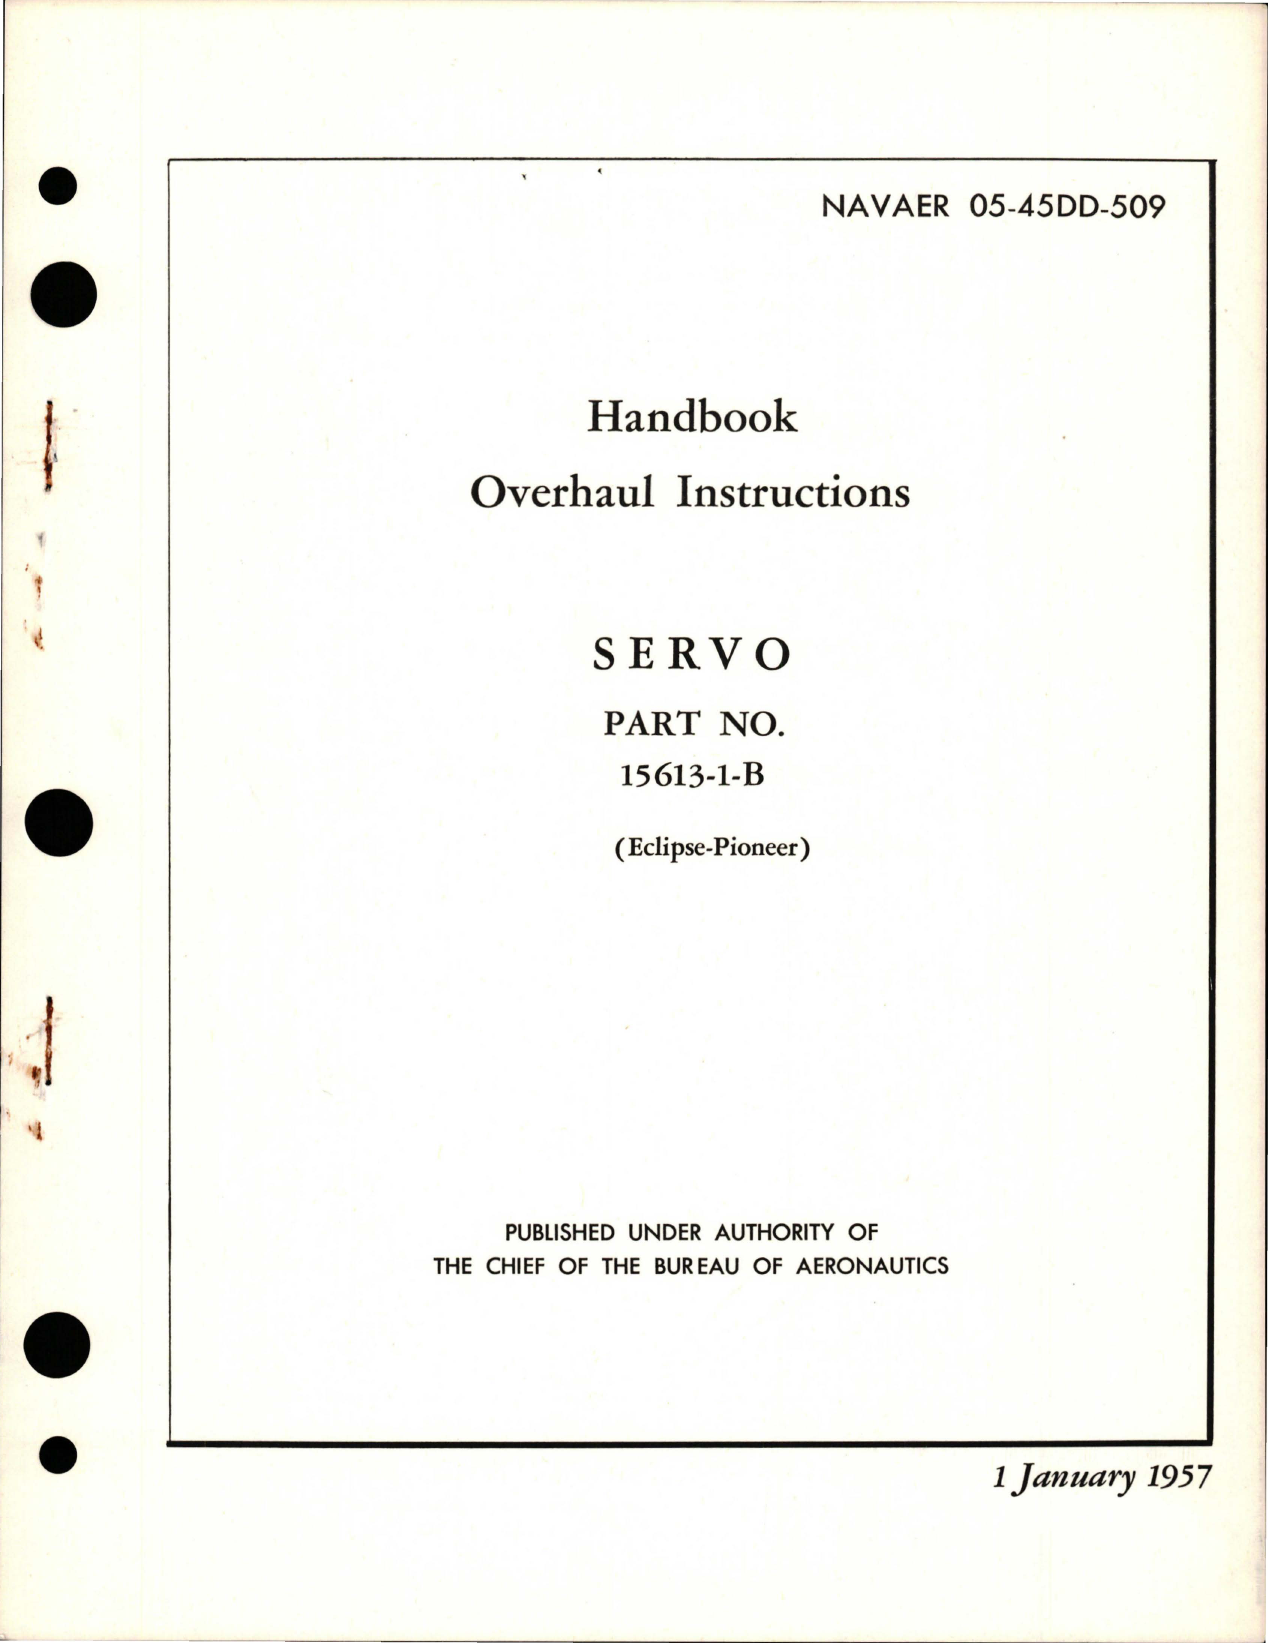 Sample page 1 from AirCorps Library document: Overhaul Instructions for Servo - Part 15613-1-B 